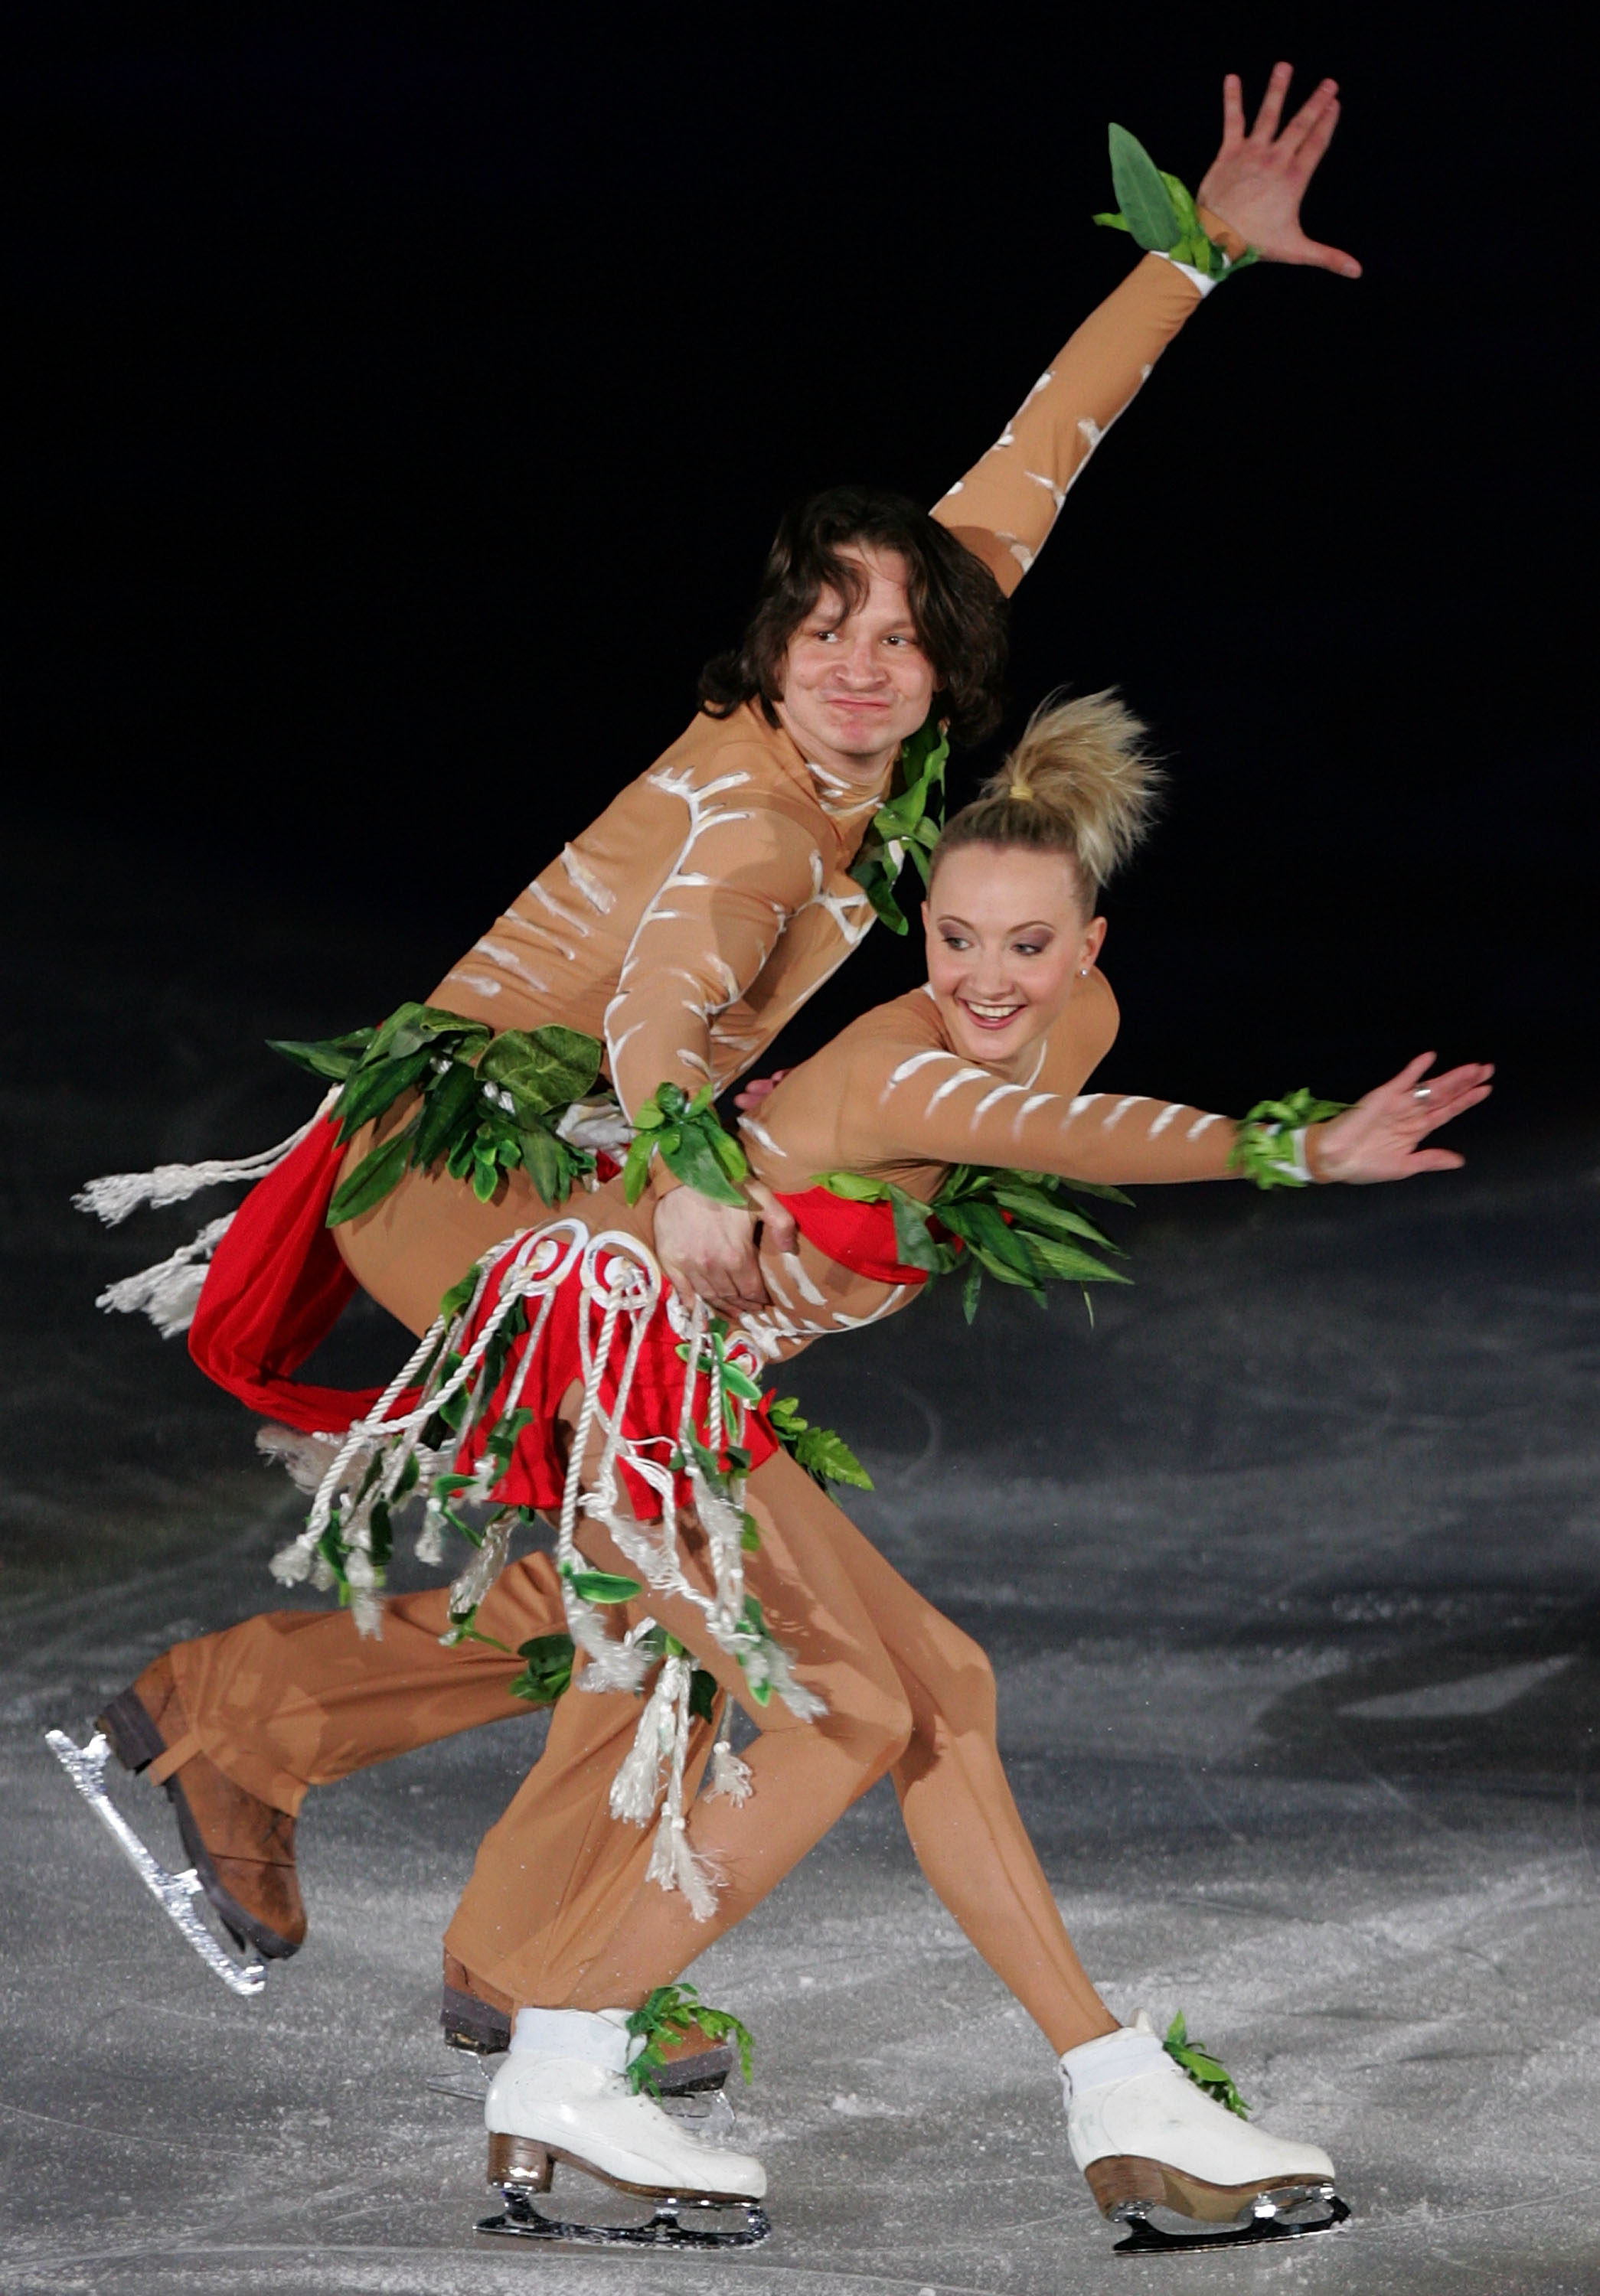 SEOUL, SOUTH KOREA - APRIL 16:  Oksana Domnina and Maxim Shabalin of Russia perform during Festa on Ice 2010 at Olympic gymnasium on April 16, 2010 in Seoul, South Korea.  (Photo by Chung Sung-Jun/Getty Images)